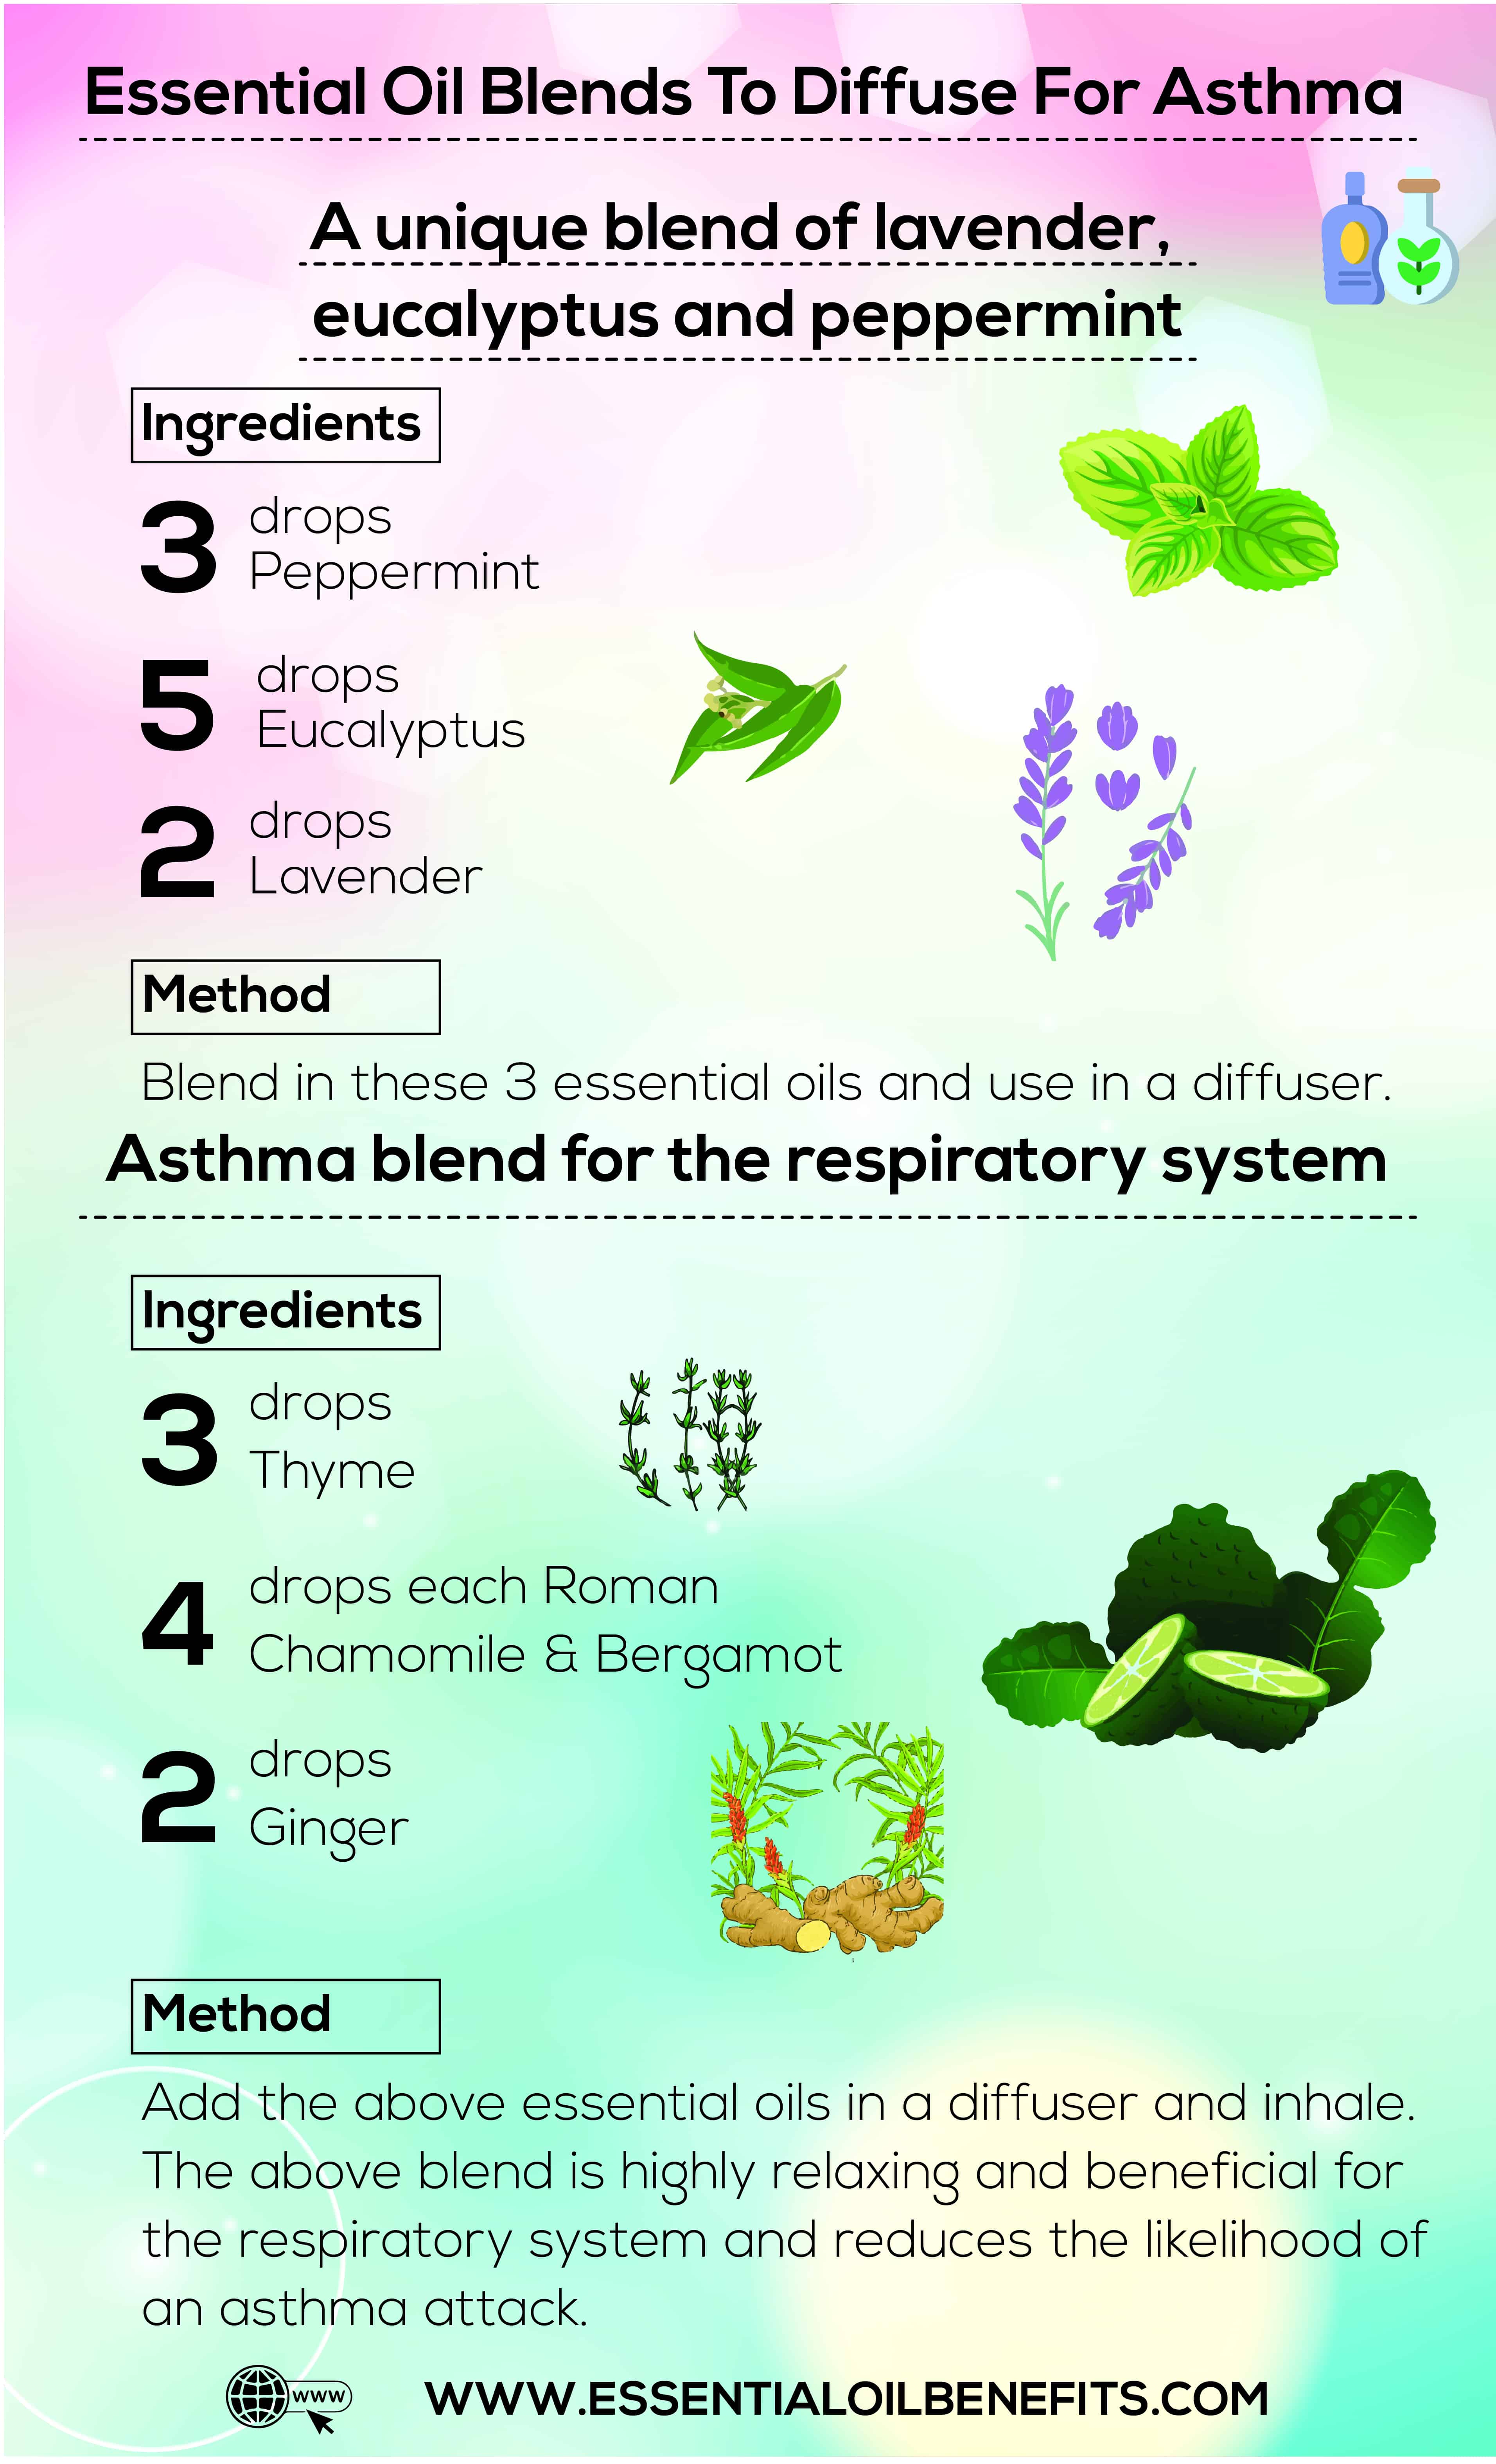 Can Essential Oils be Used for Asthma Treatment? | Essential Oil Benefits